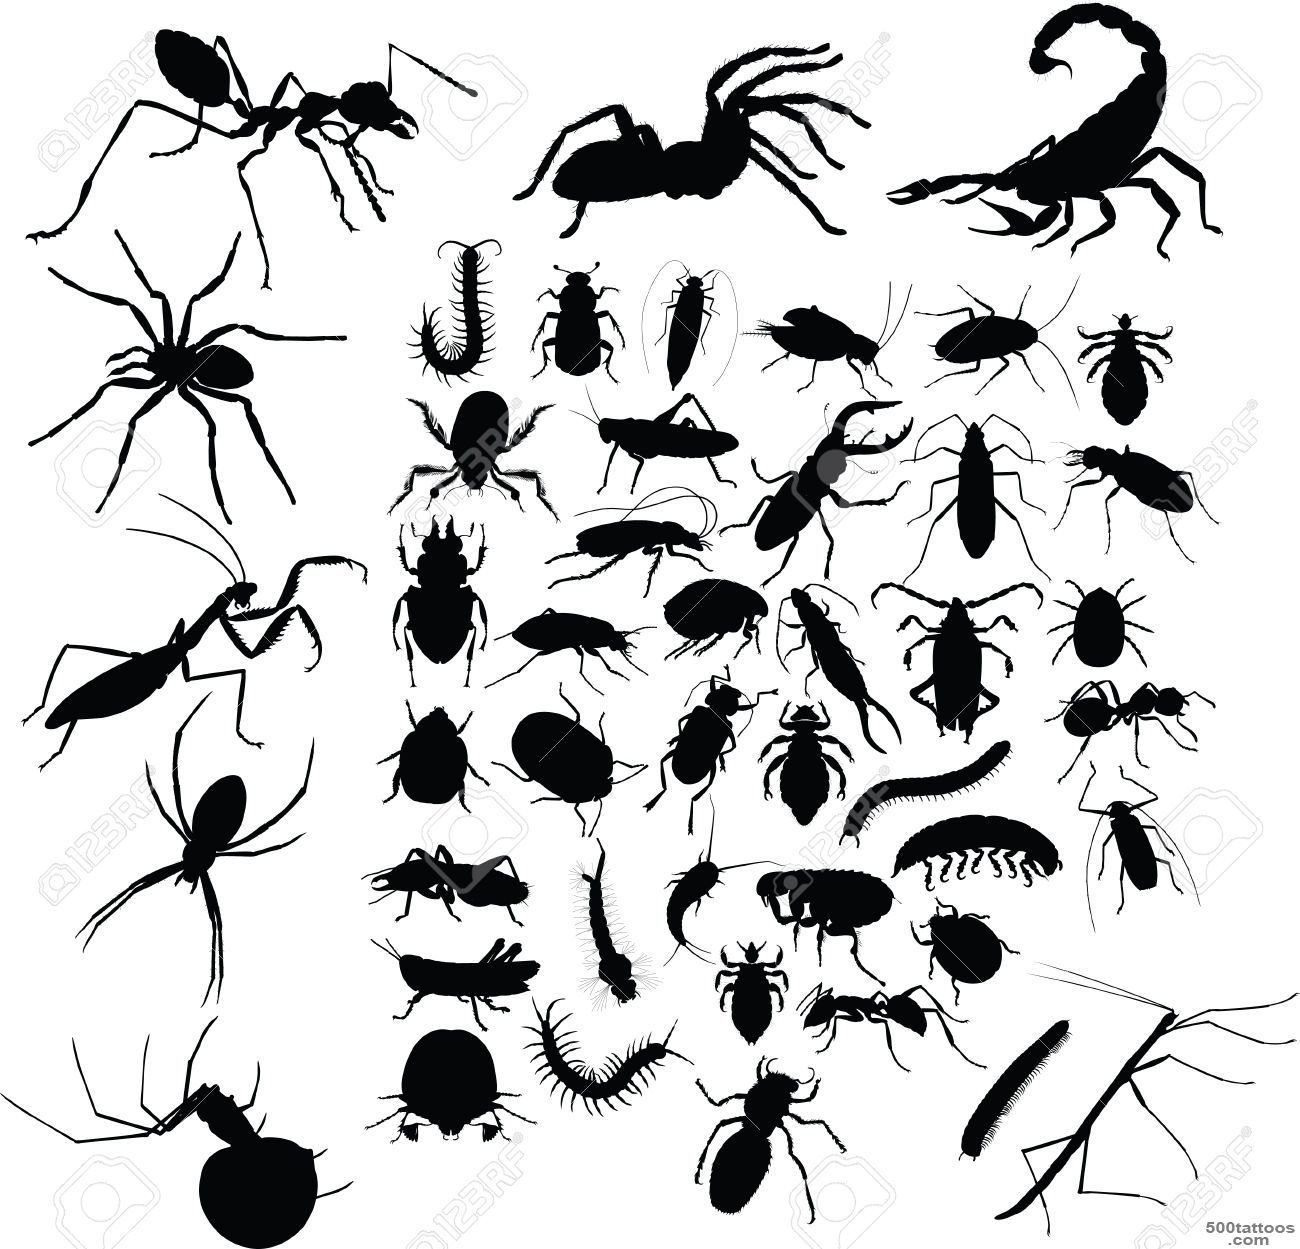 Insects Tattoo Royalty Free Cliparts, Vectors, And Stock ..._9